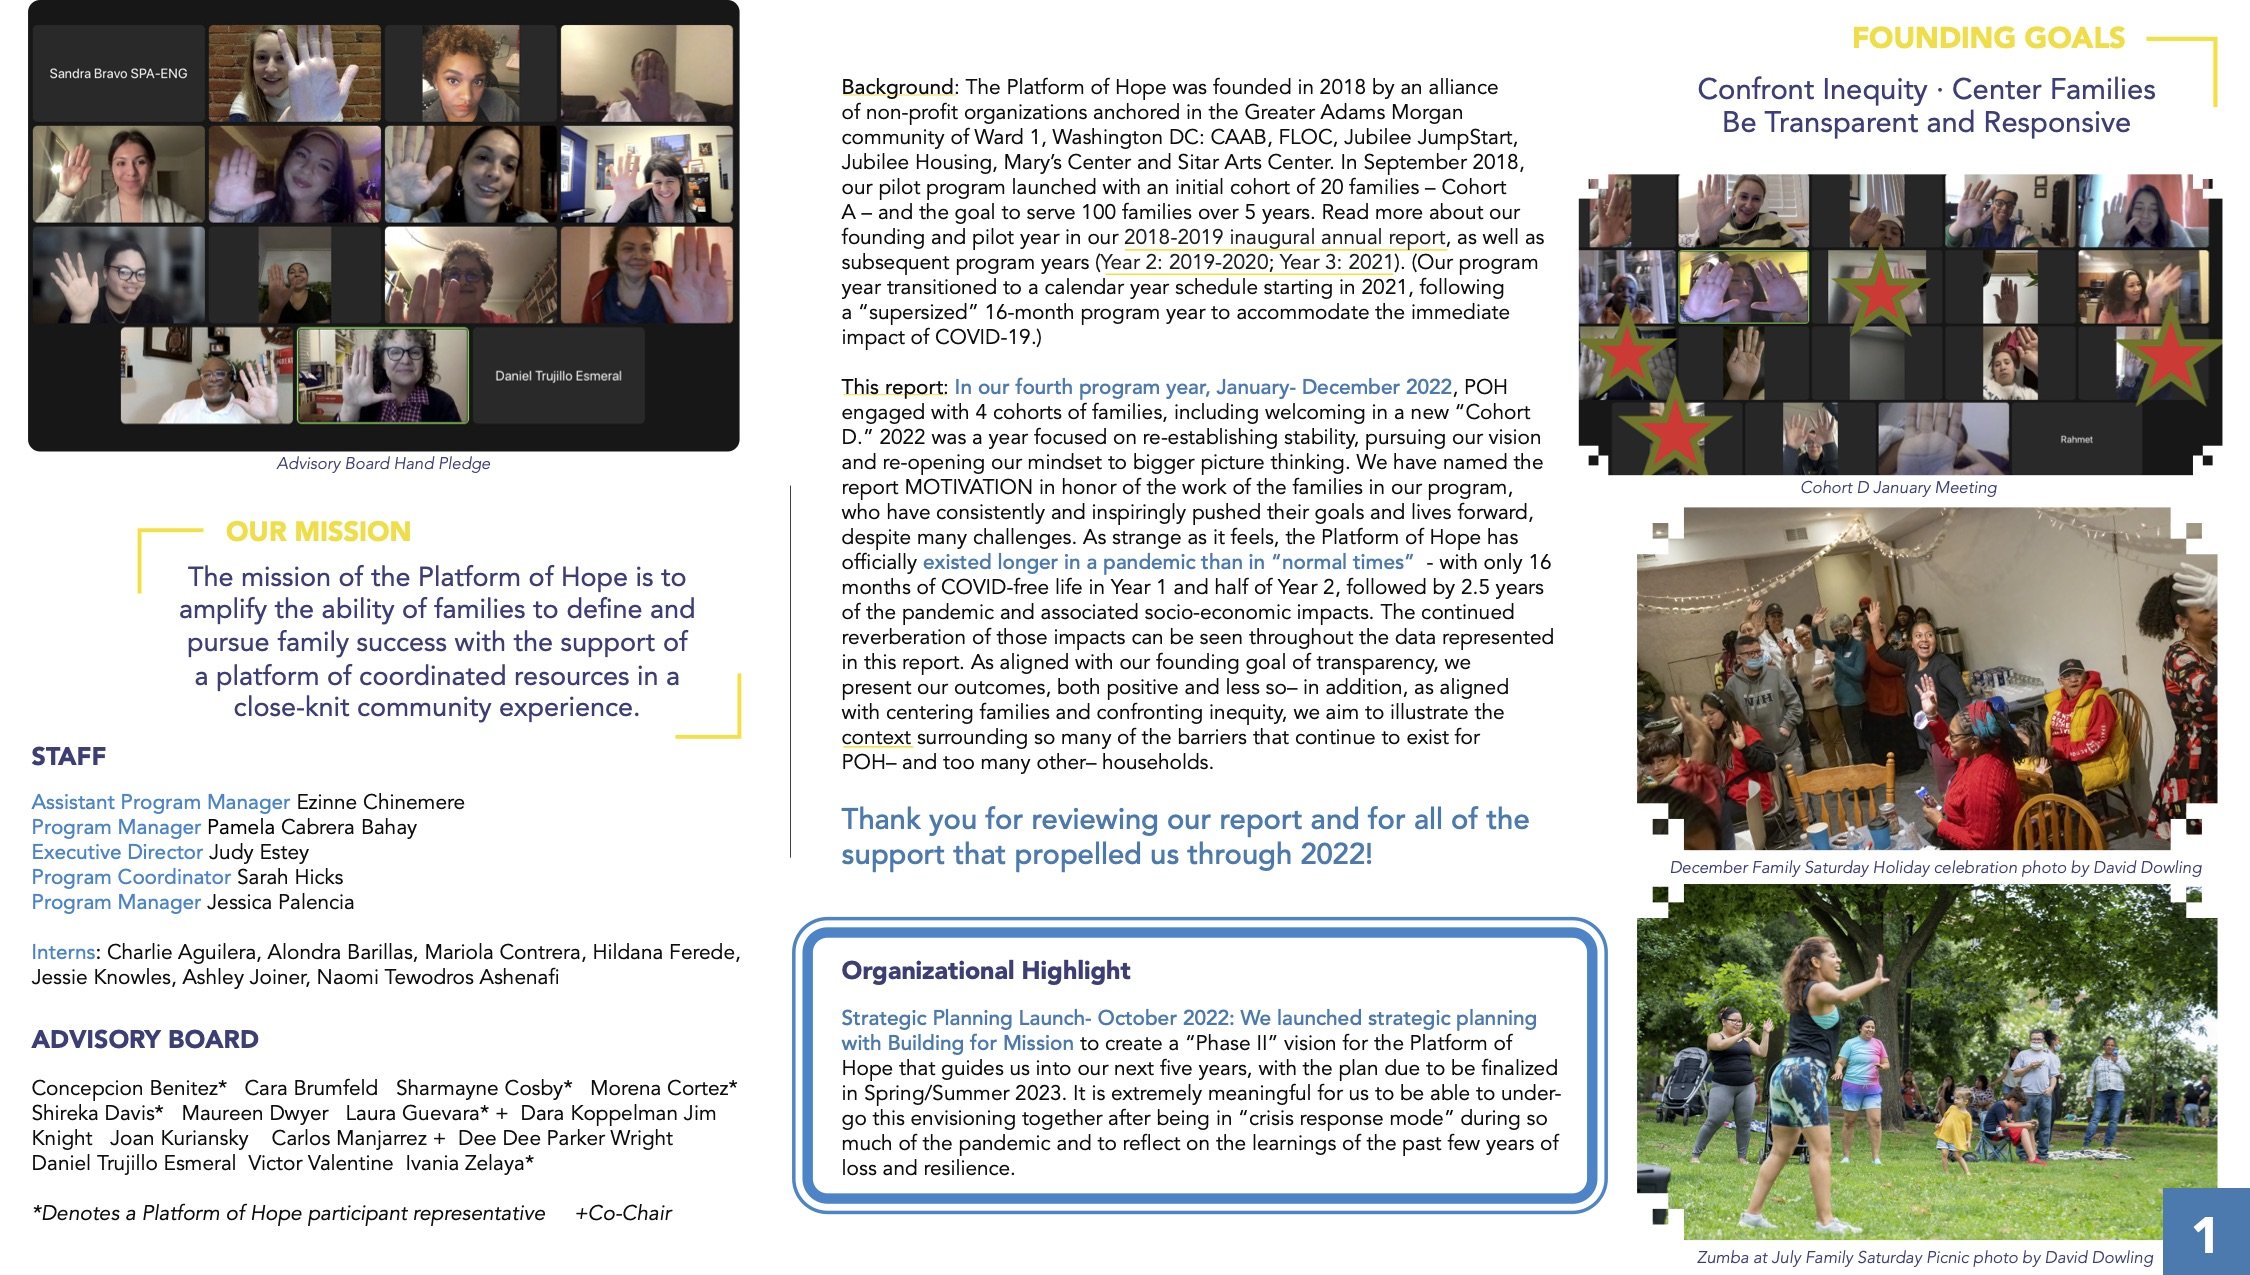 2022 ANNUAL REPORT MOTIVATION 3.28.22 copy- PAGE 1.jpg